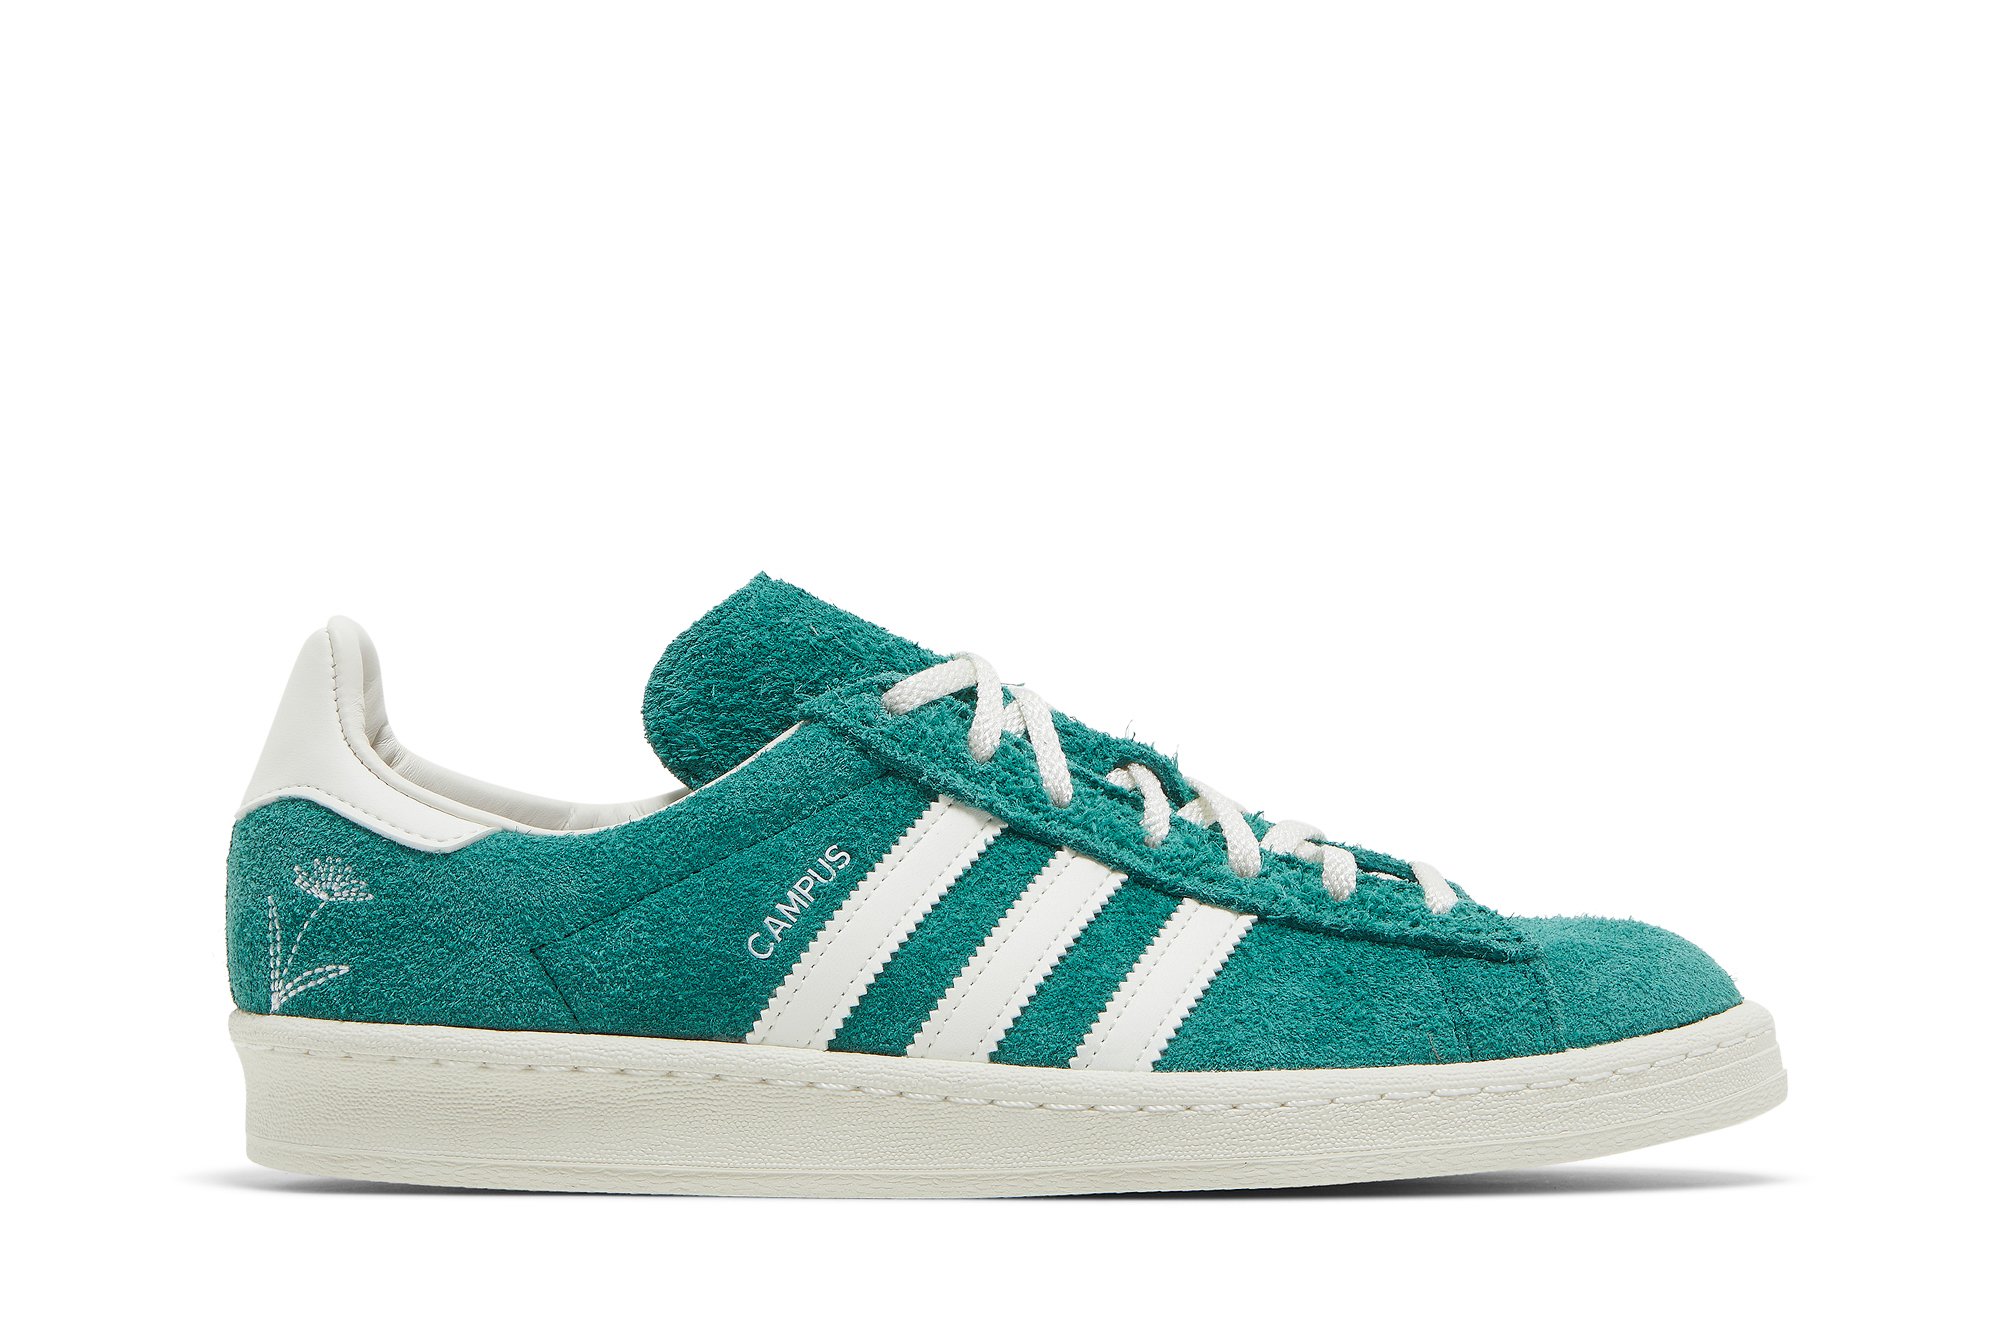 Buy Campus 80s 'London Green' - GY4581 | GOAT